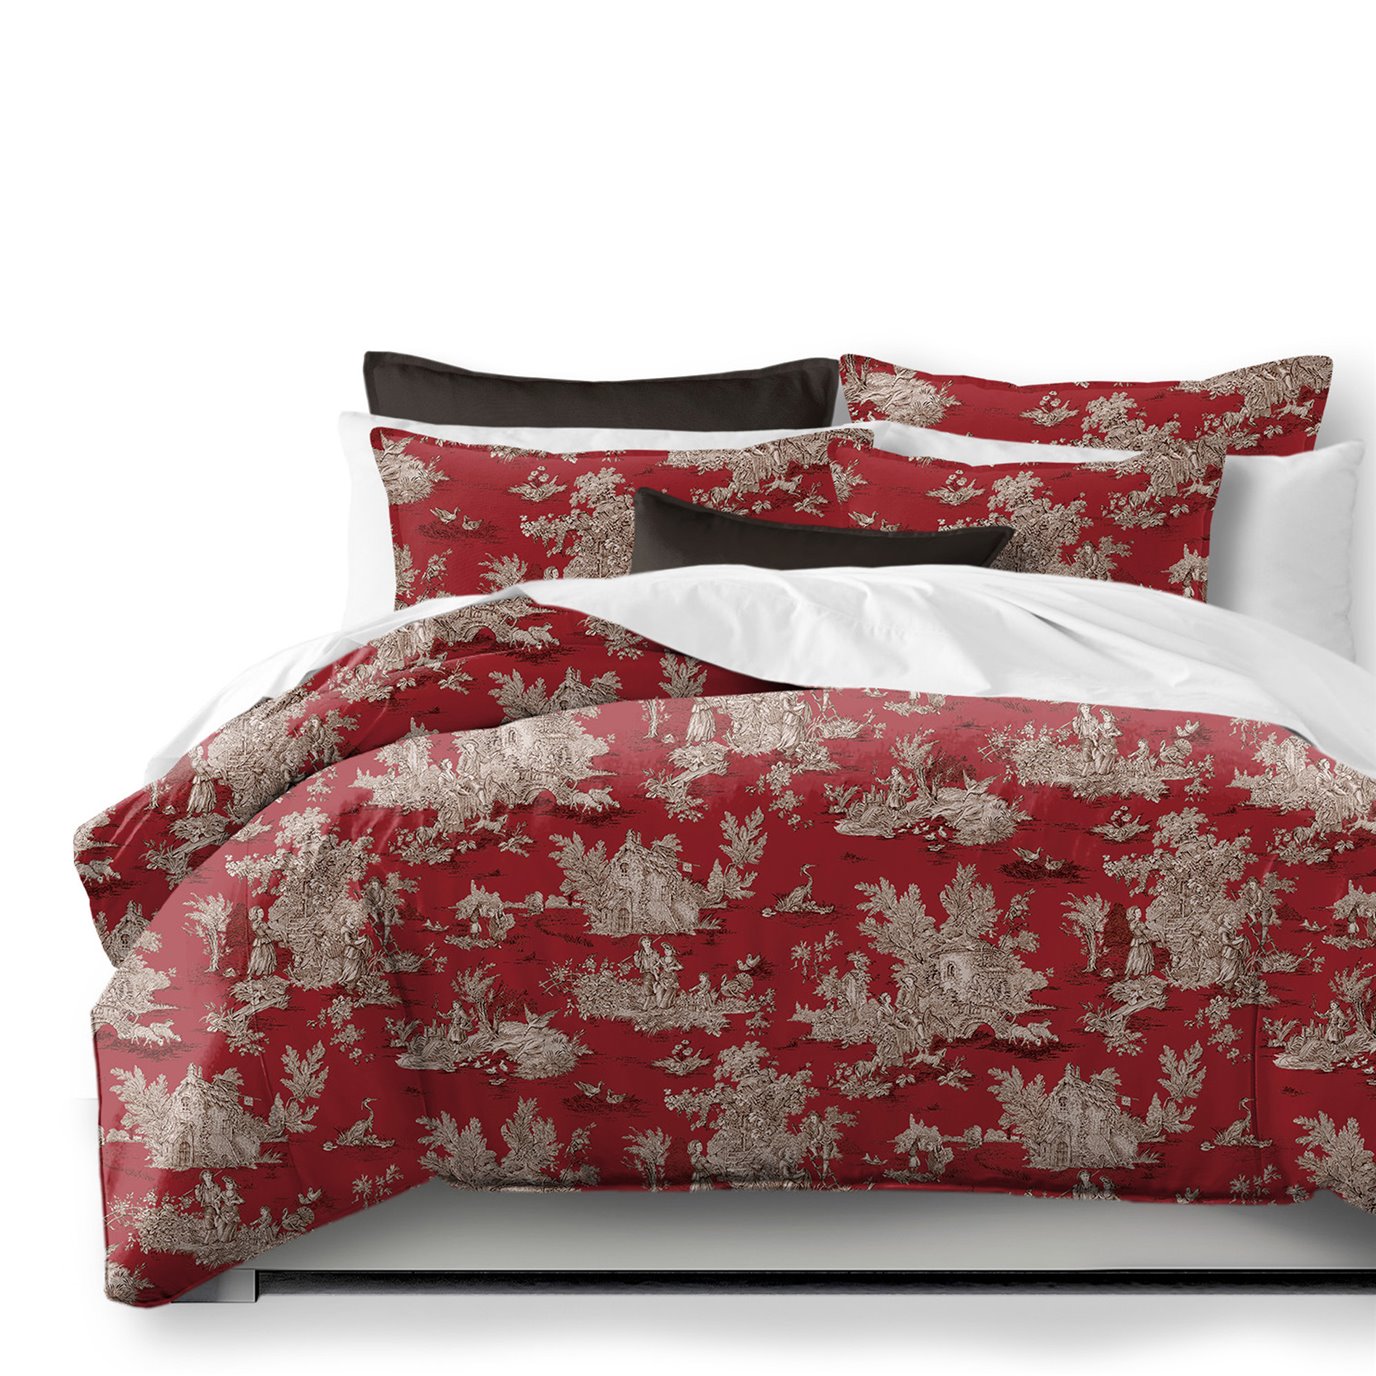 Chateau Red/Black Comforter and Pillow Sham(s) Set - Size Super King